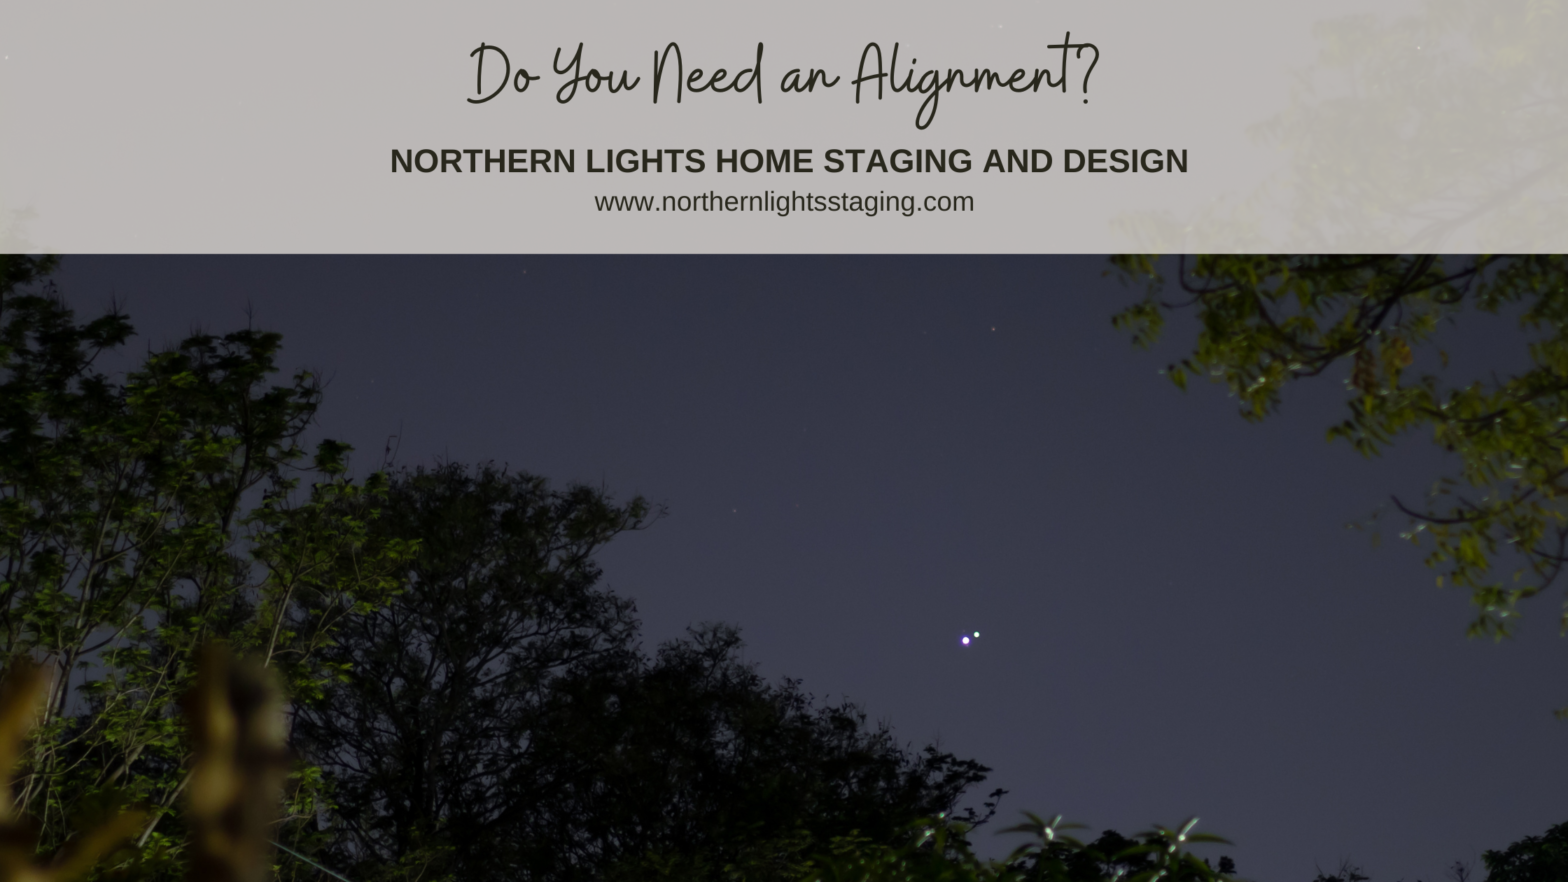 Do you need an Alignment?